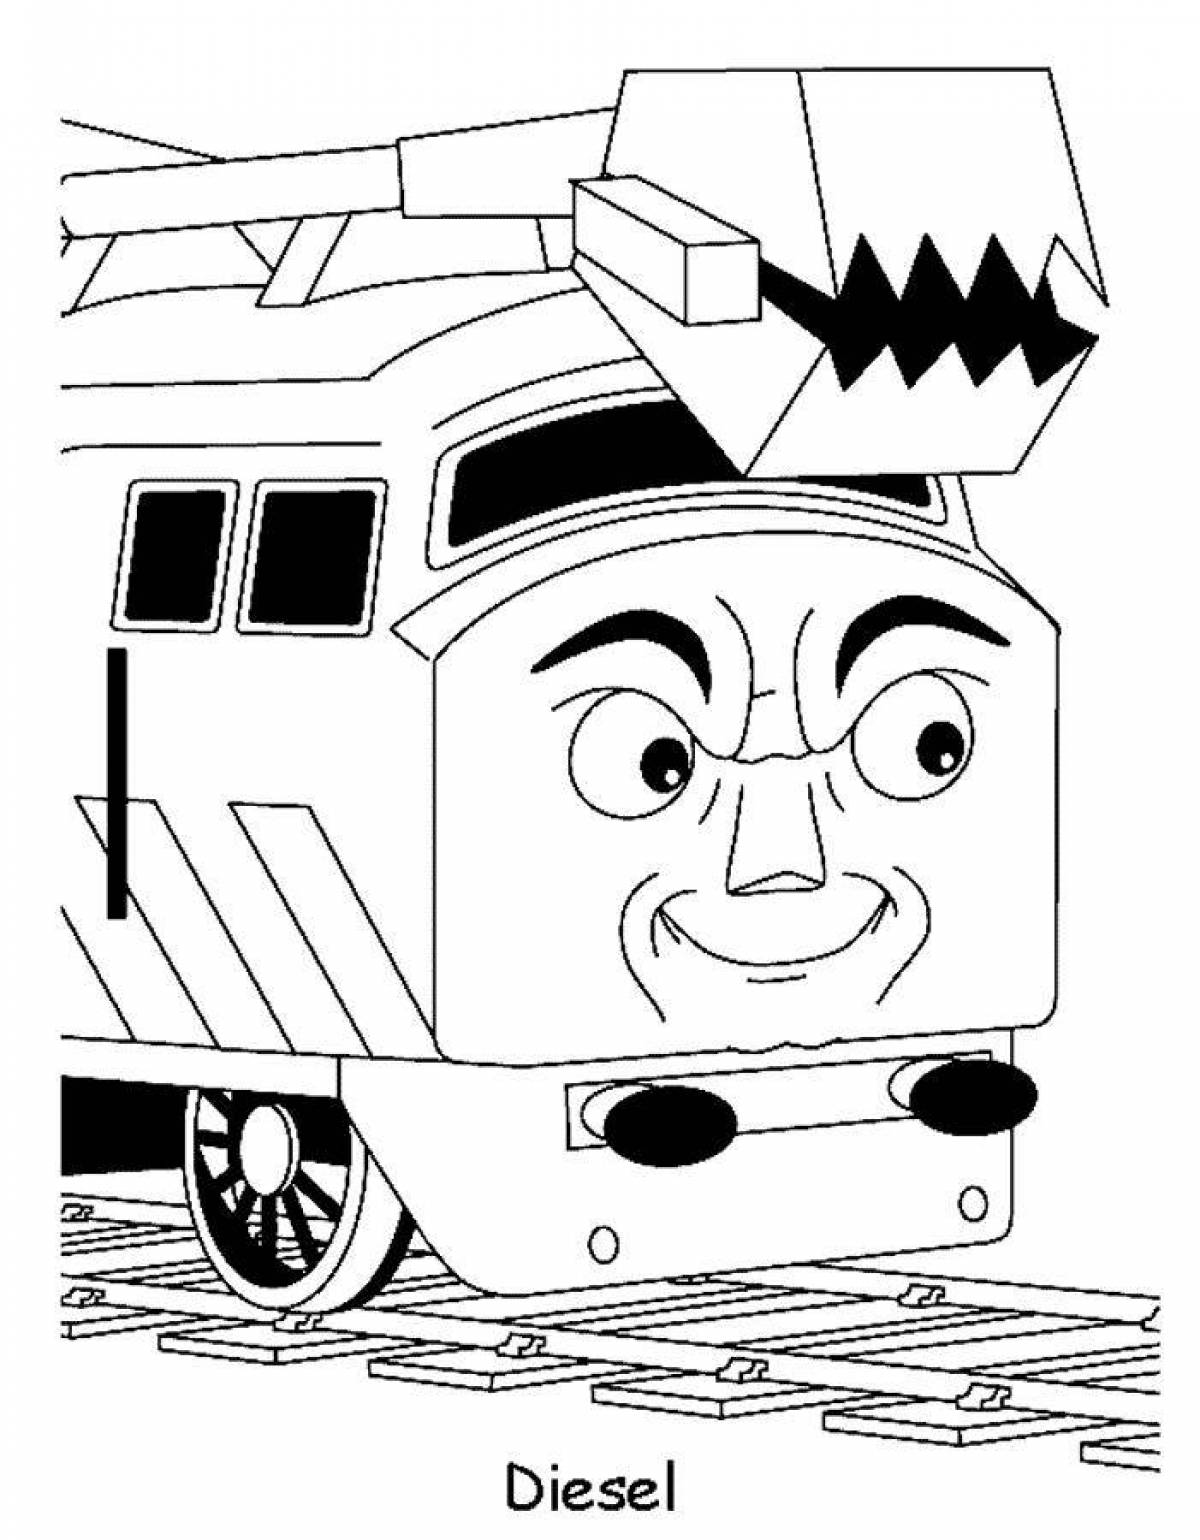 Thomas the Eater's Spectacular Coloring Page